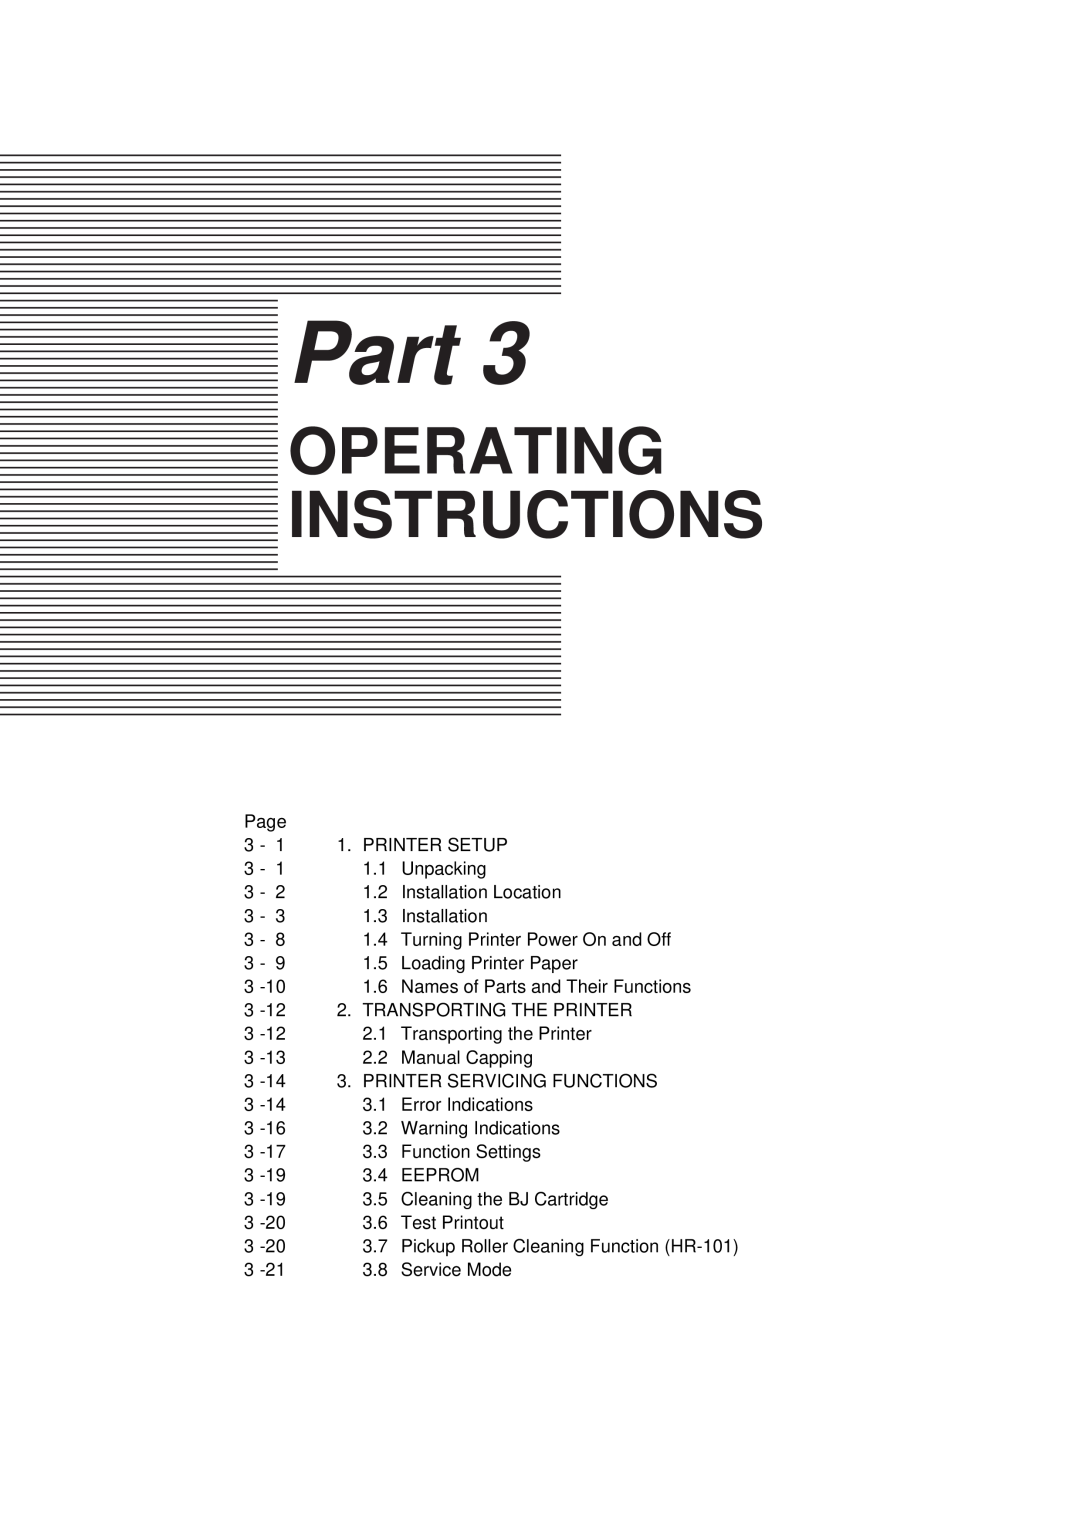 Canon QY8-1360-000 manual Operating Instructions, Part 